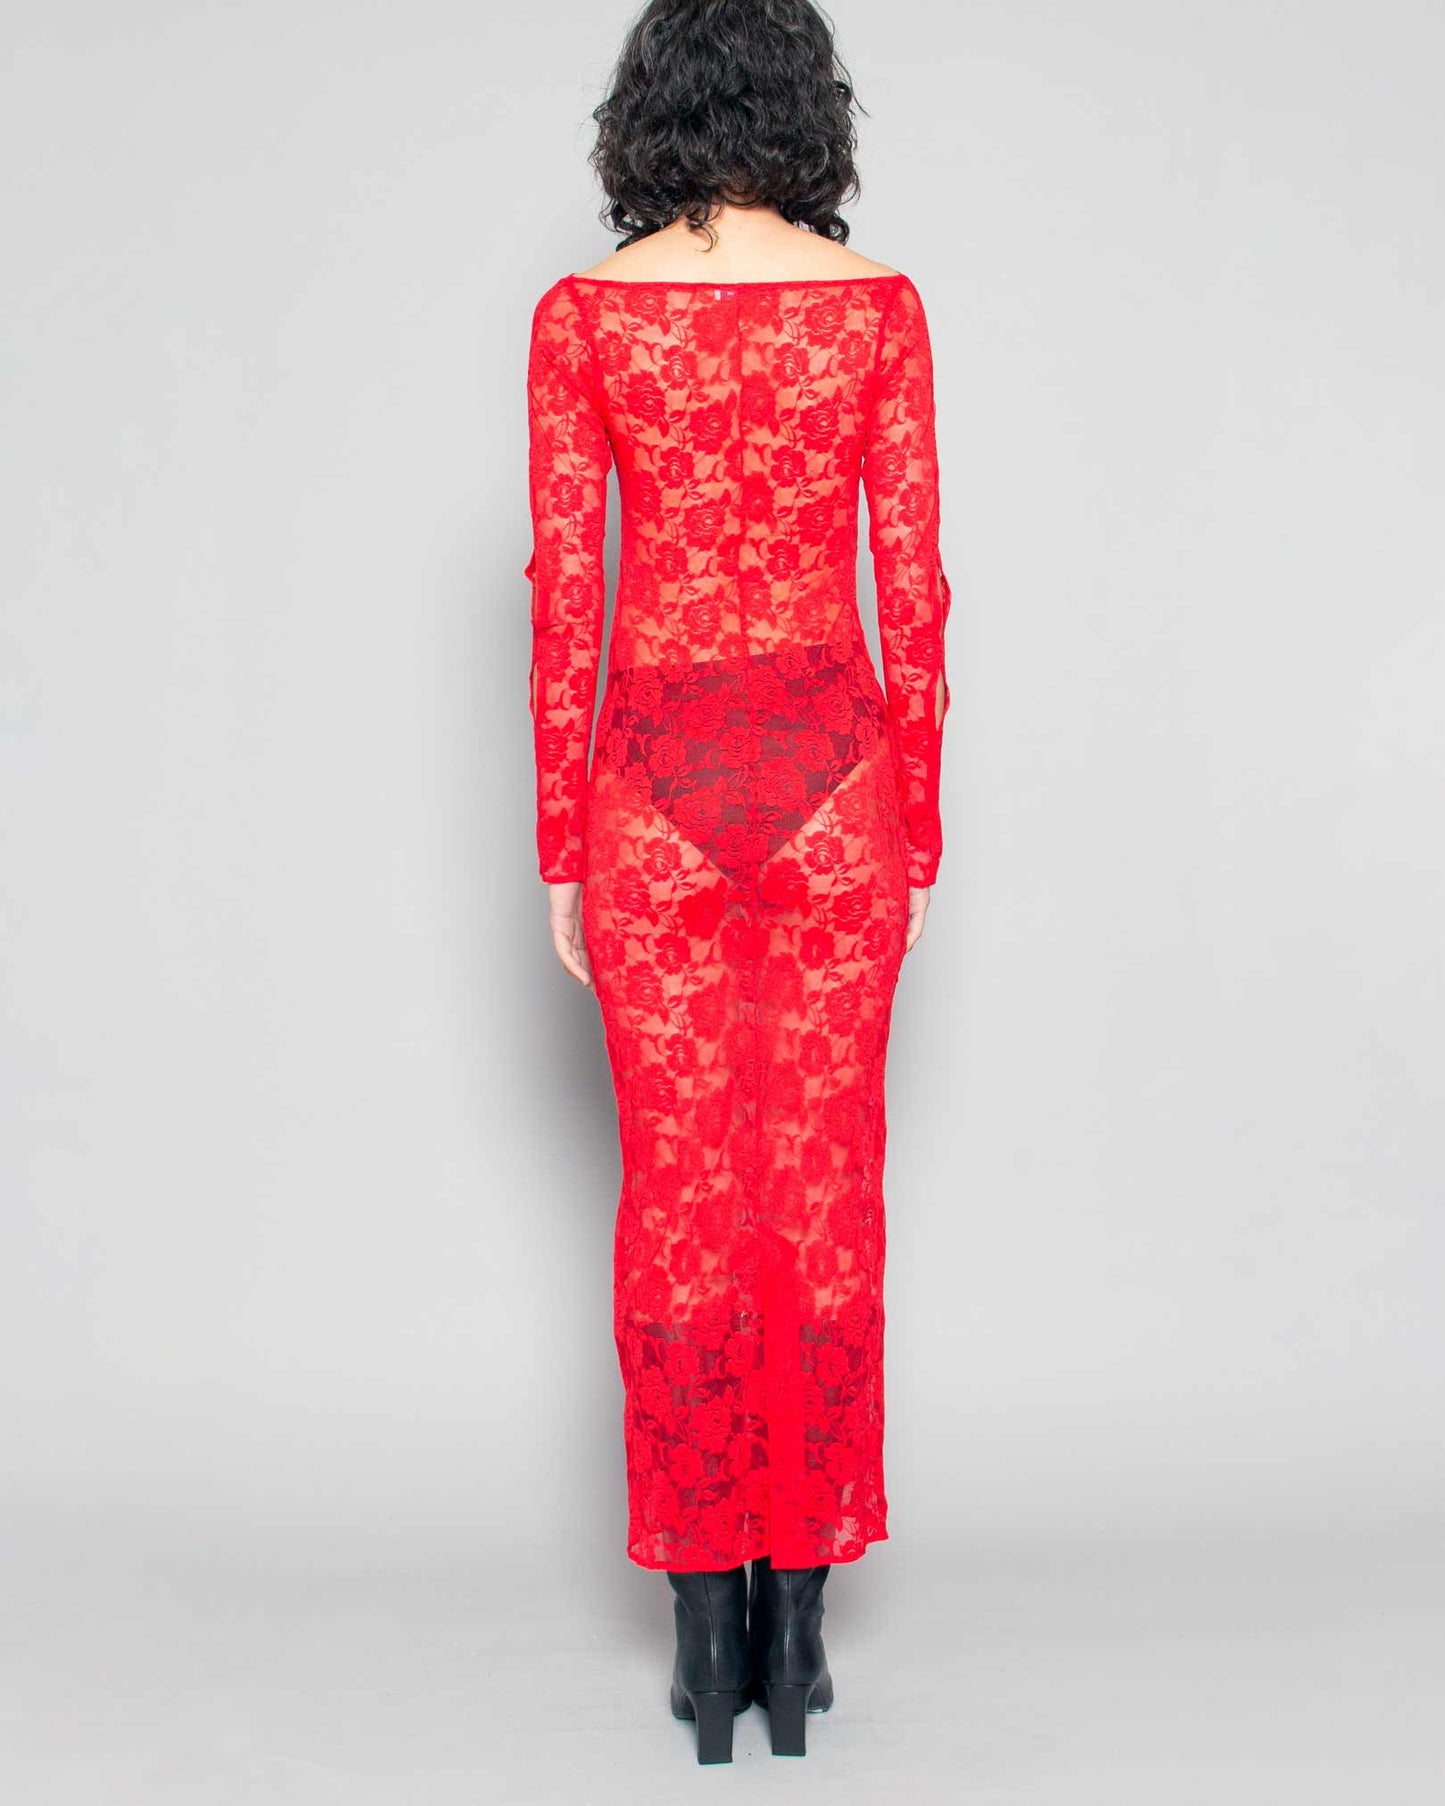 HEATHER STANKO Slashed Sleeve Lace Dress in Cherry available at Lahn.shop